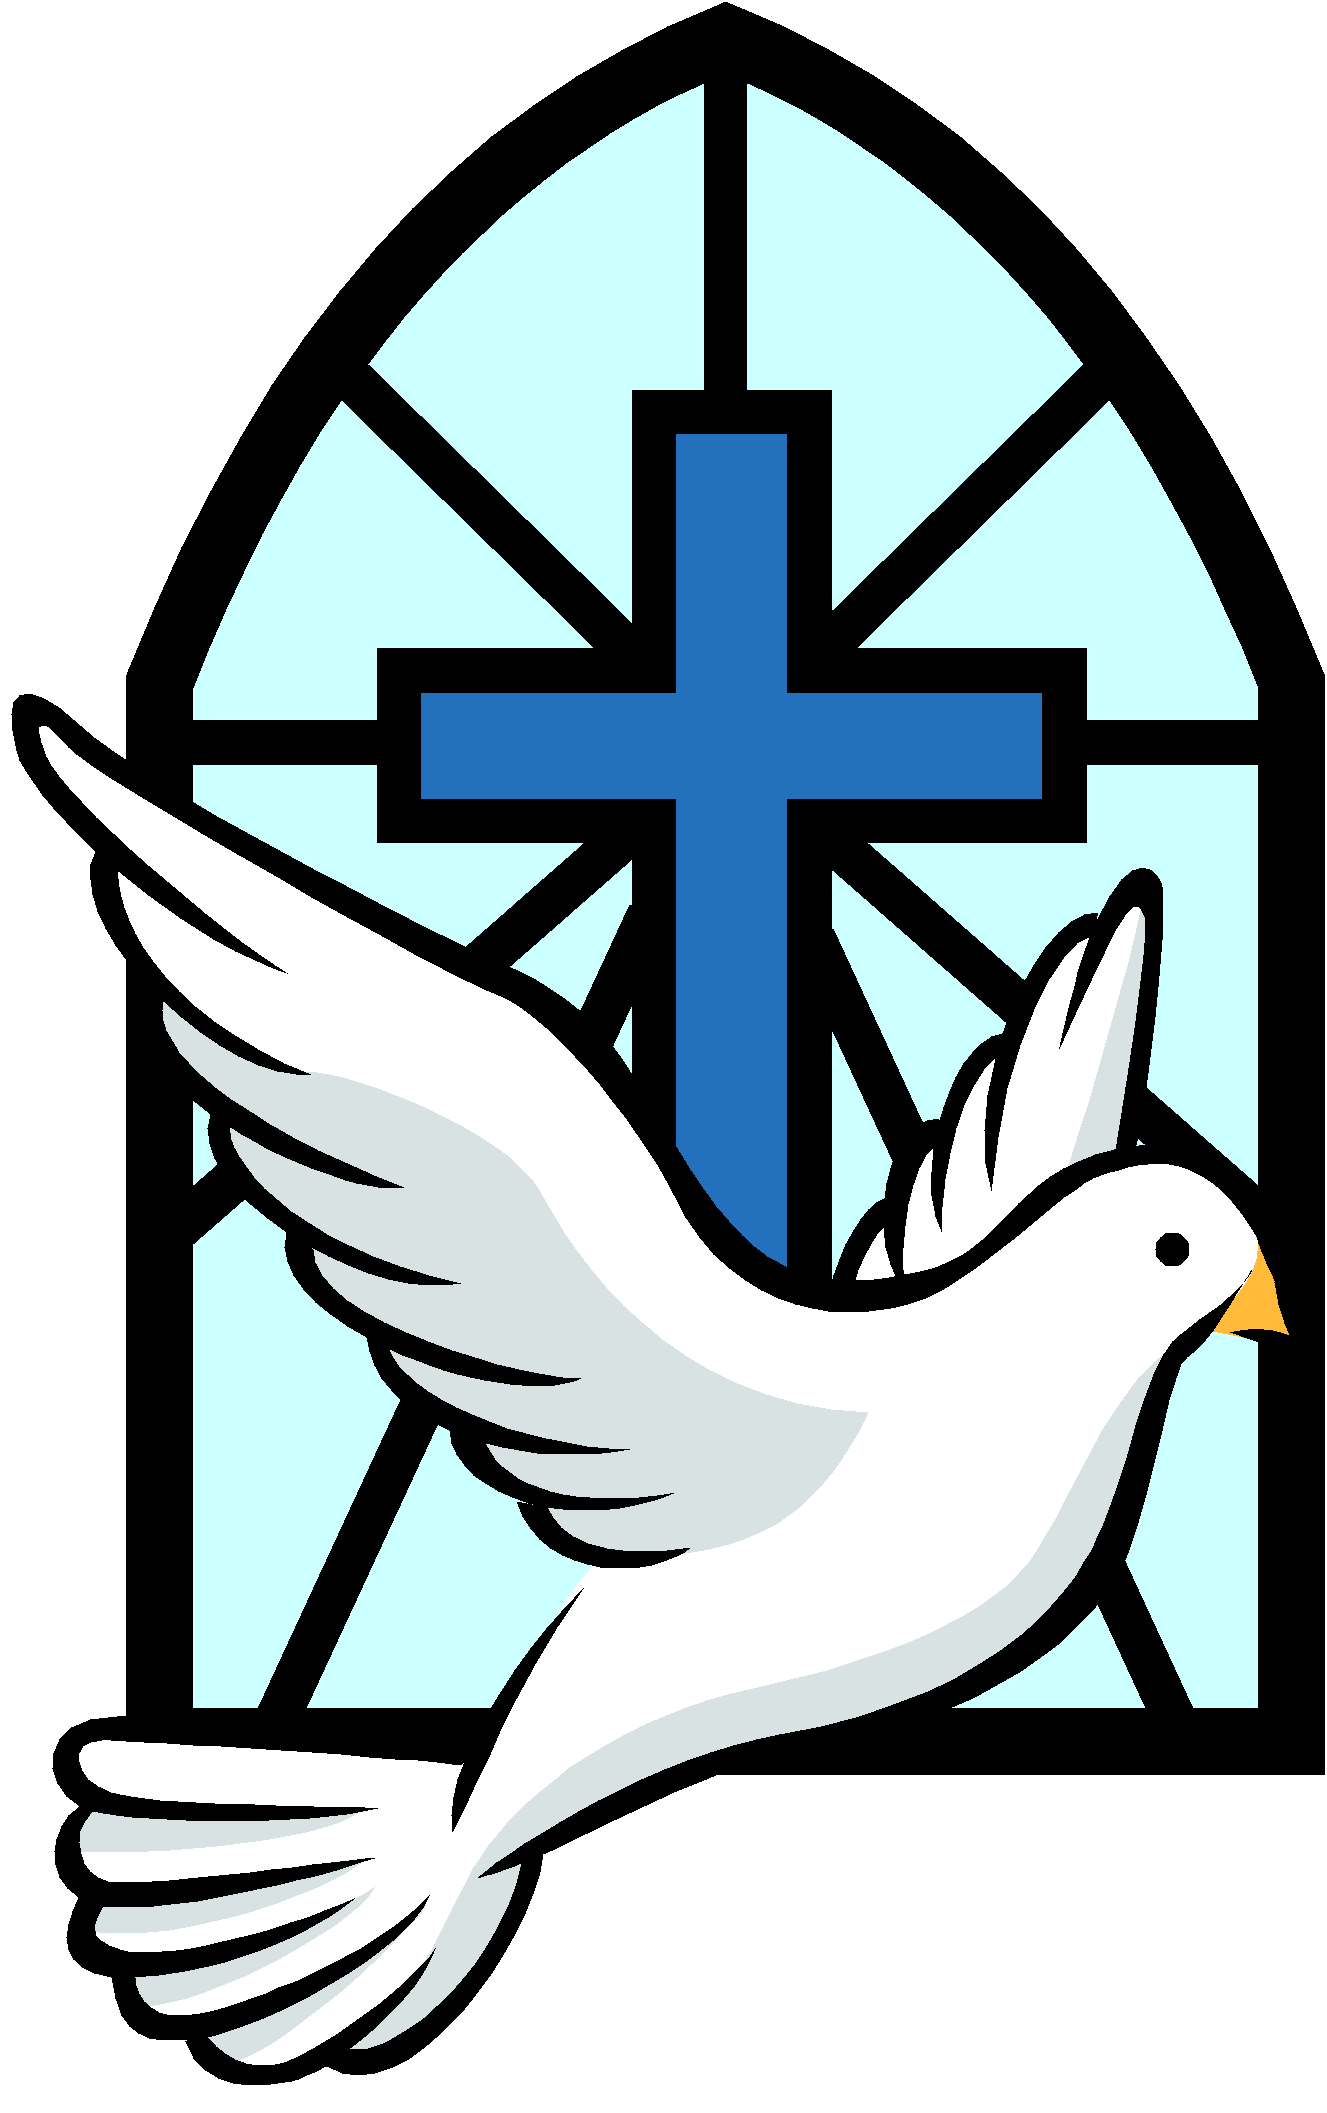 Heaven clipart dove. Confirmation explores hope and